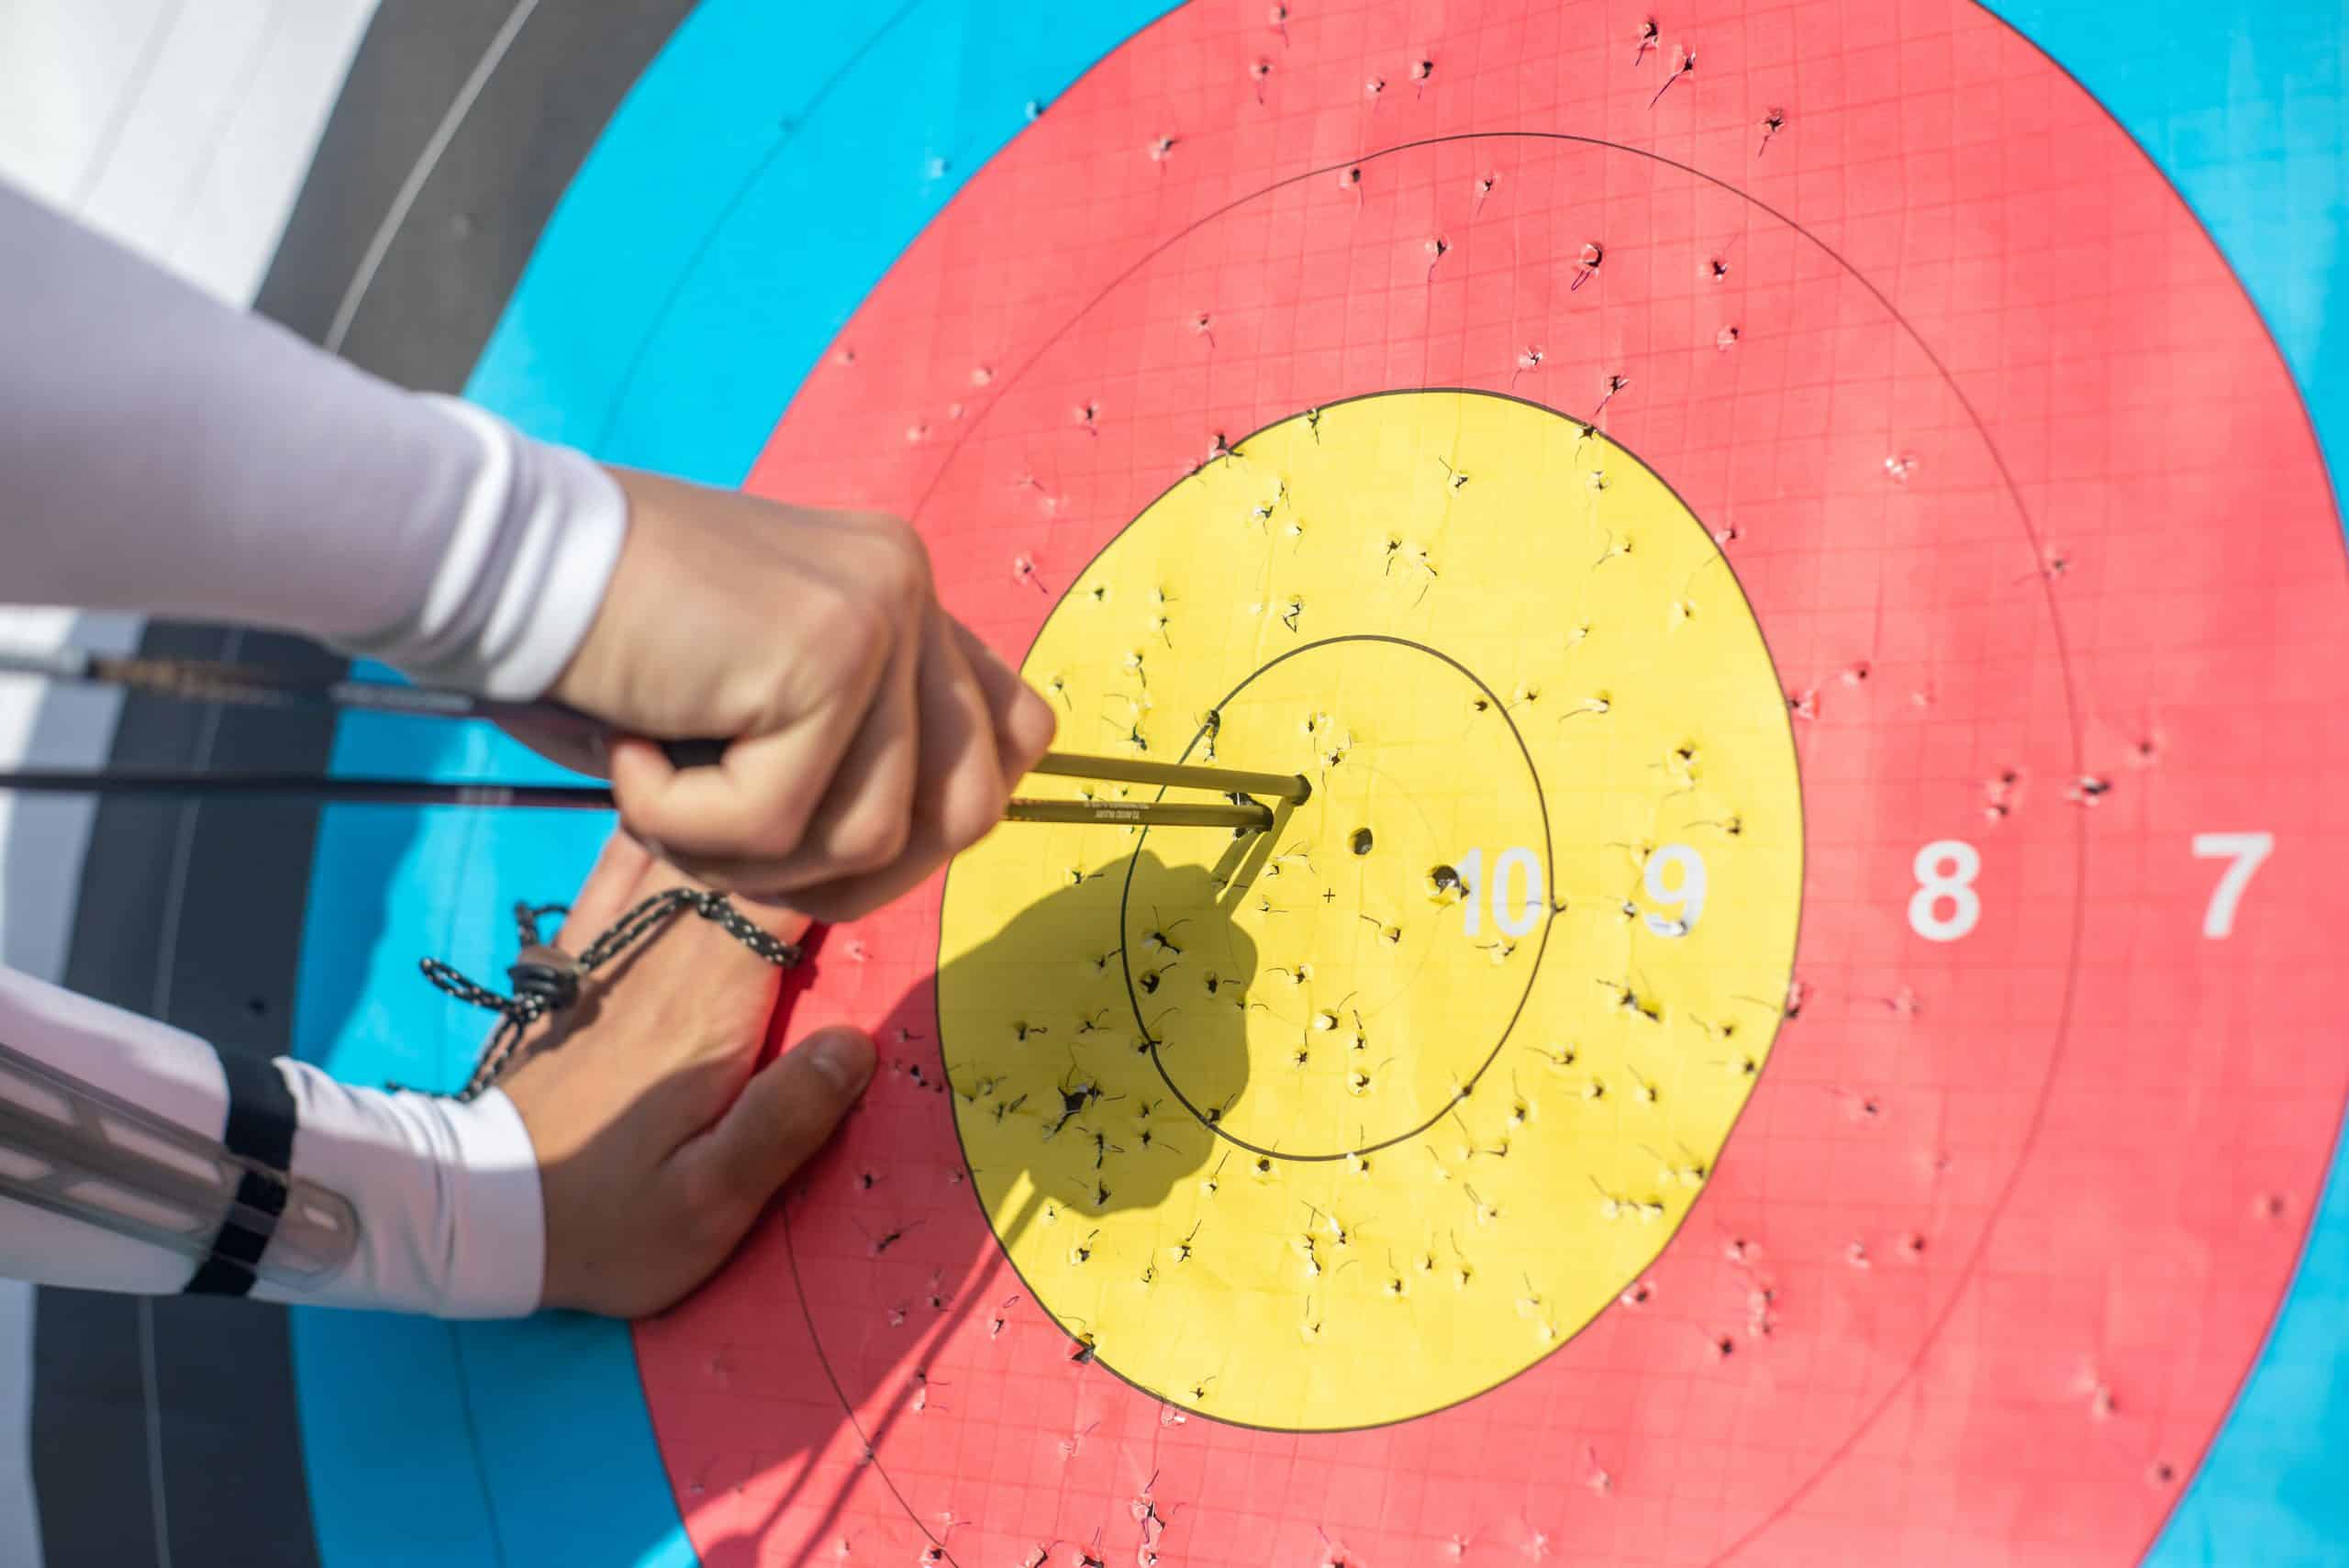 An archery target with arrows being pulled out from the centre